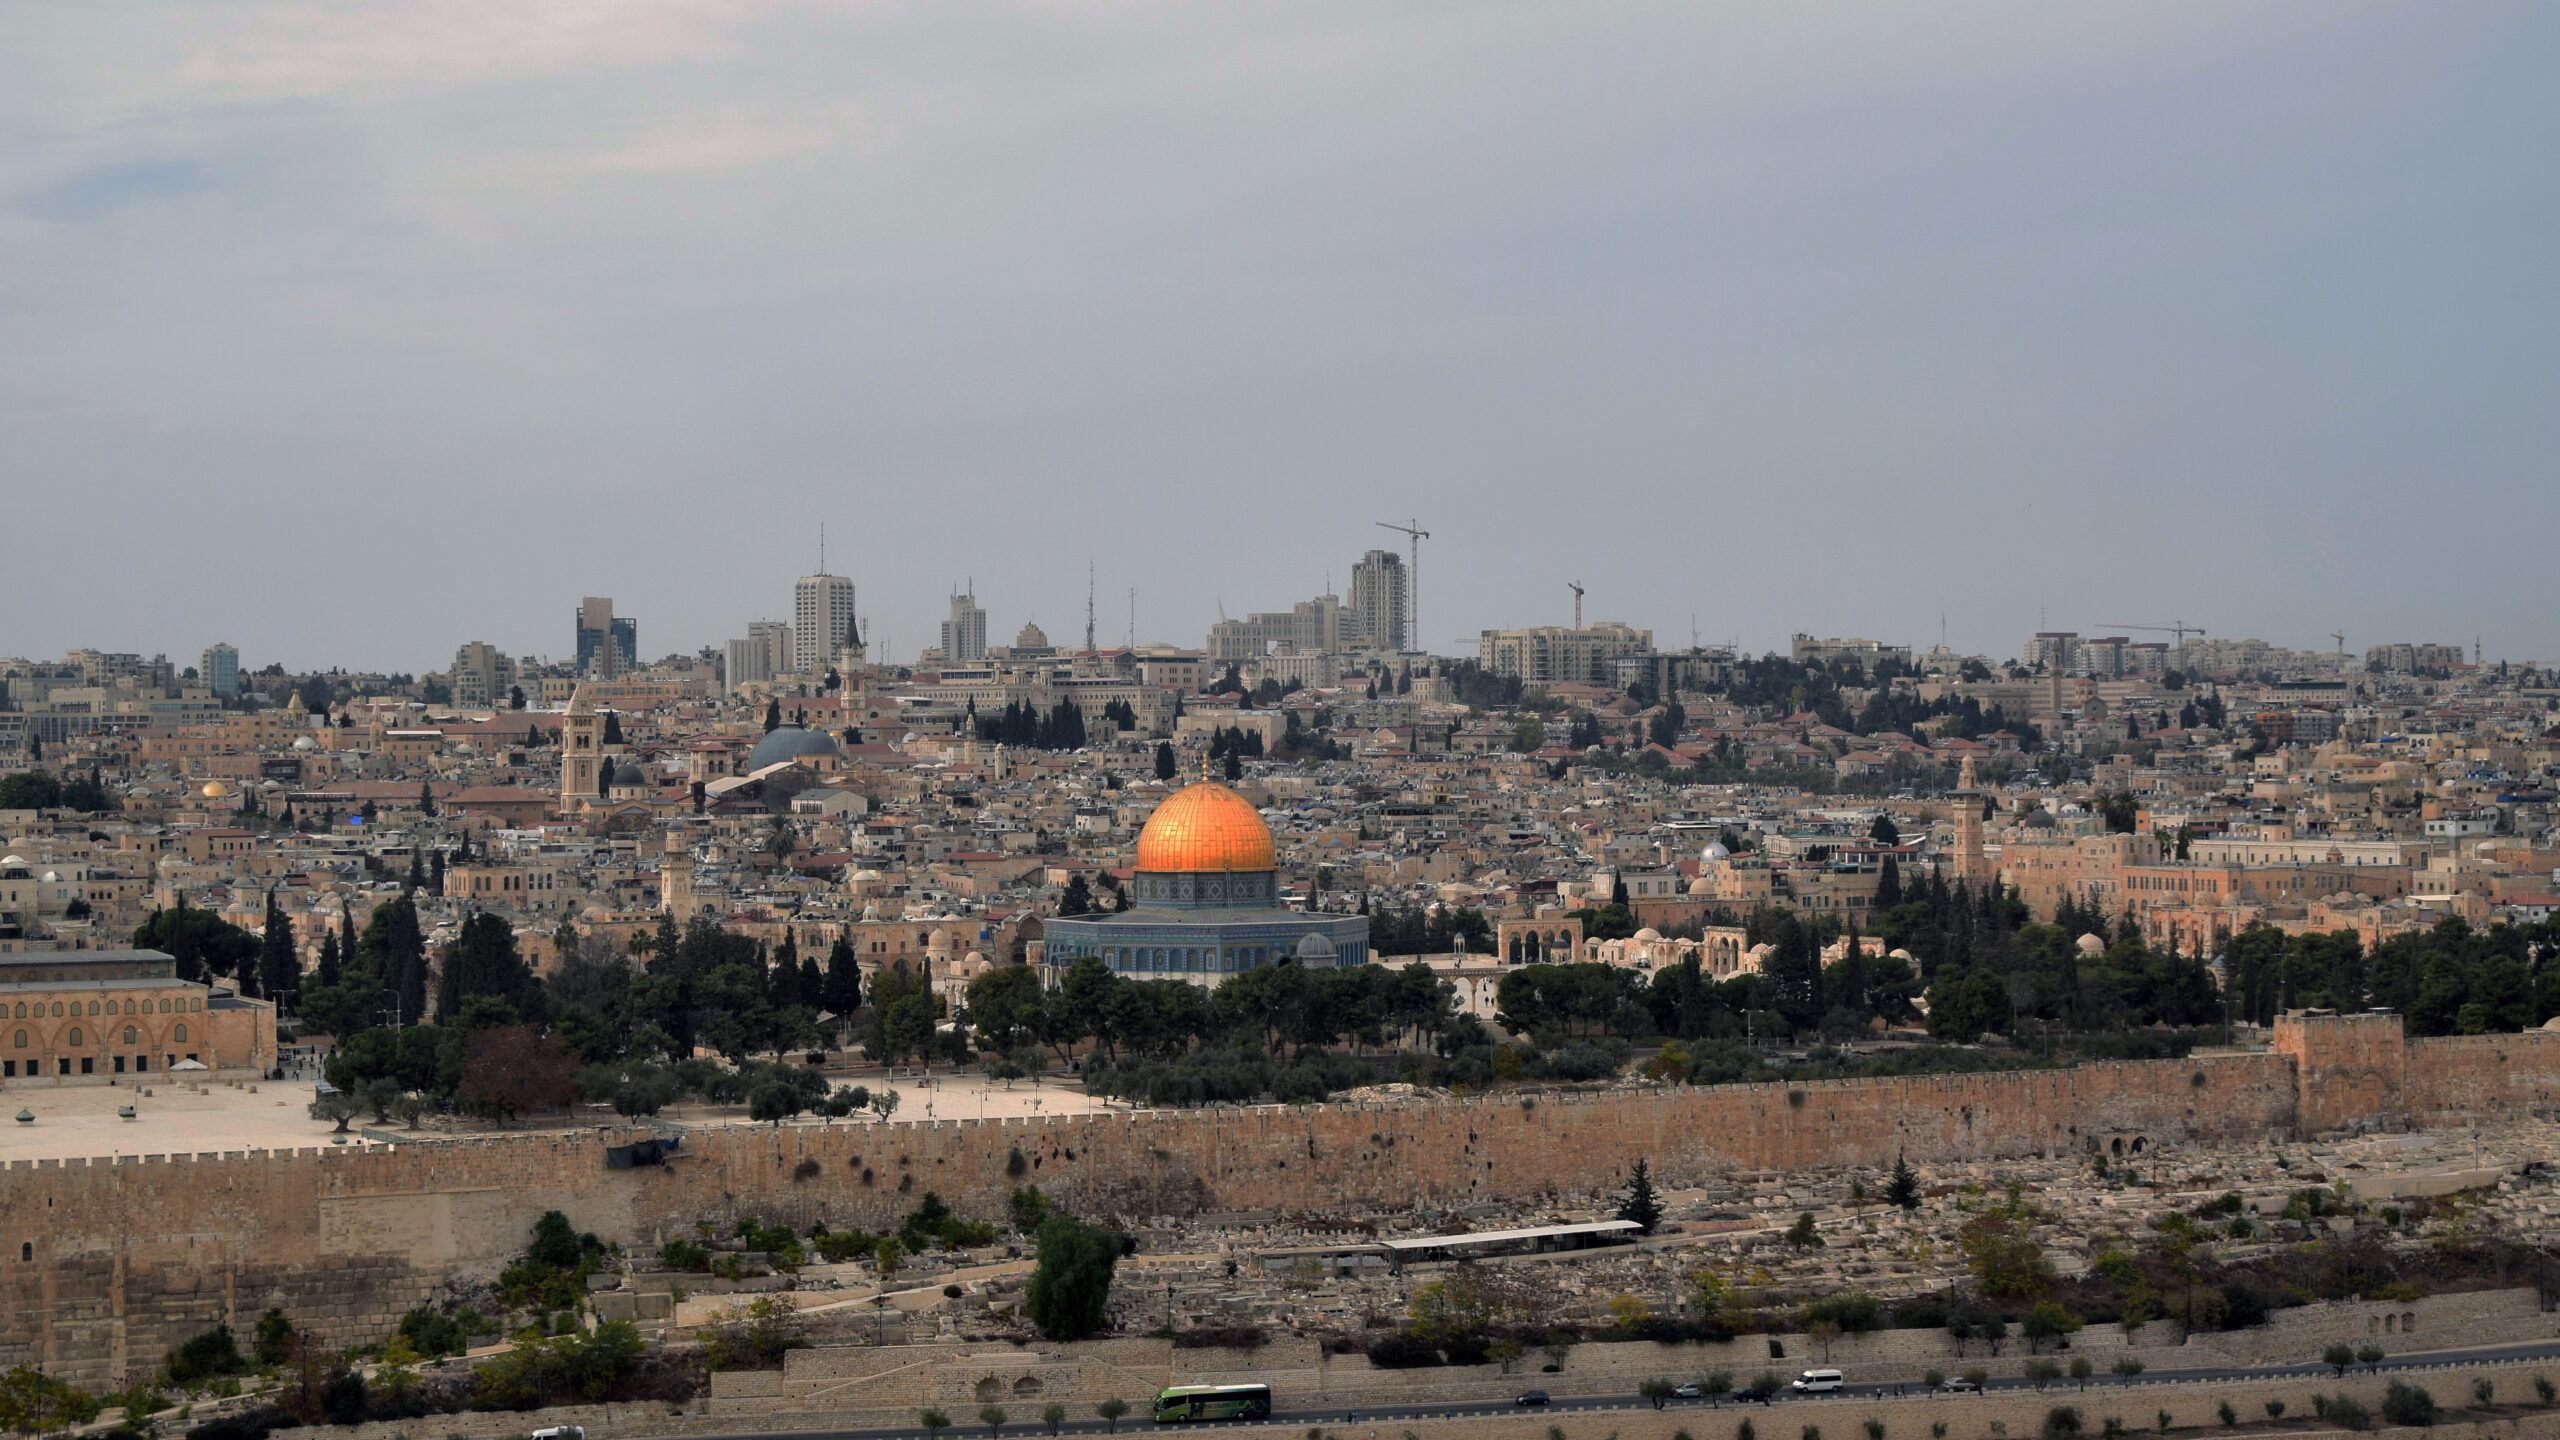 Temple Mount seen from the Mount of Olives